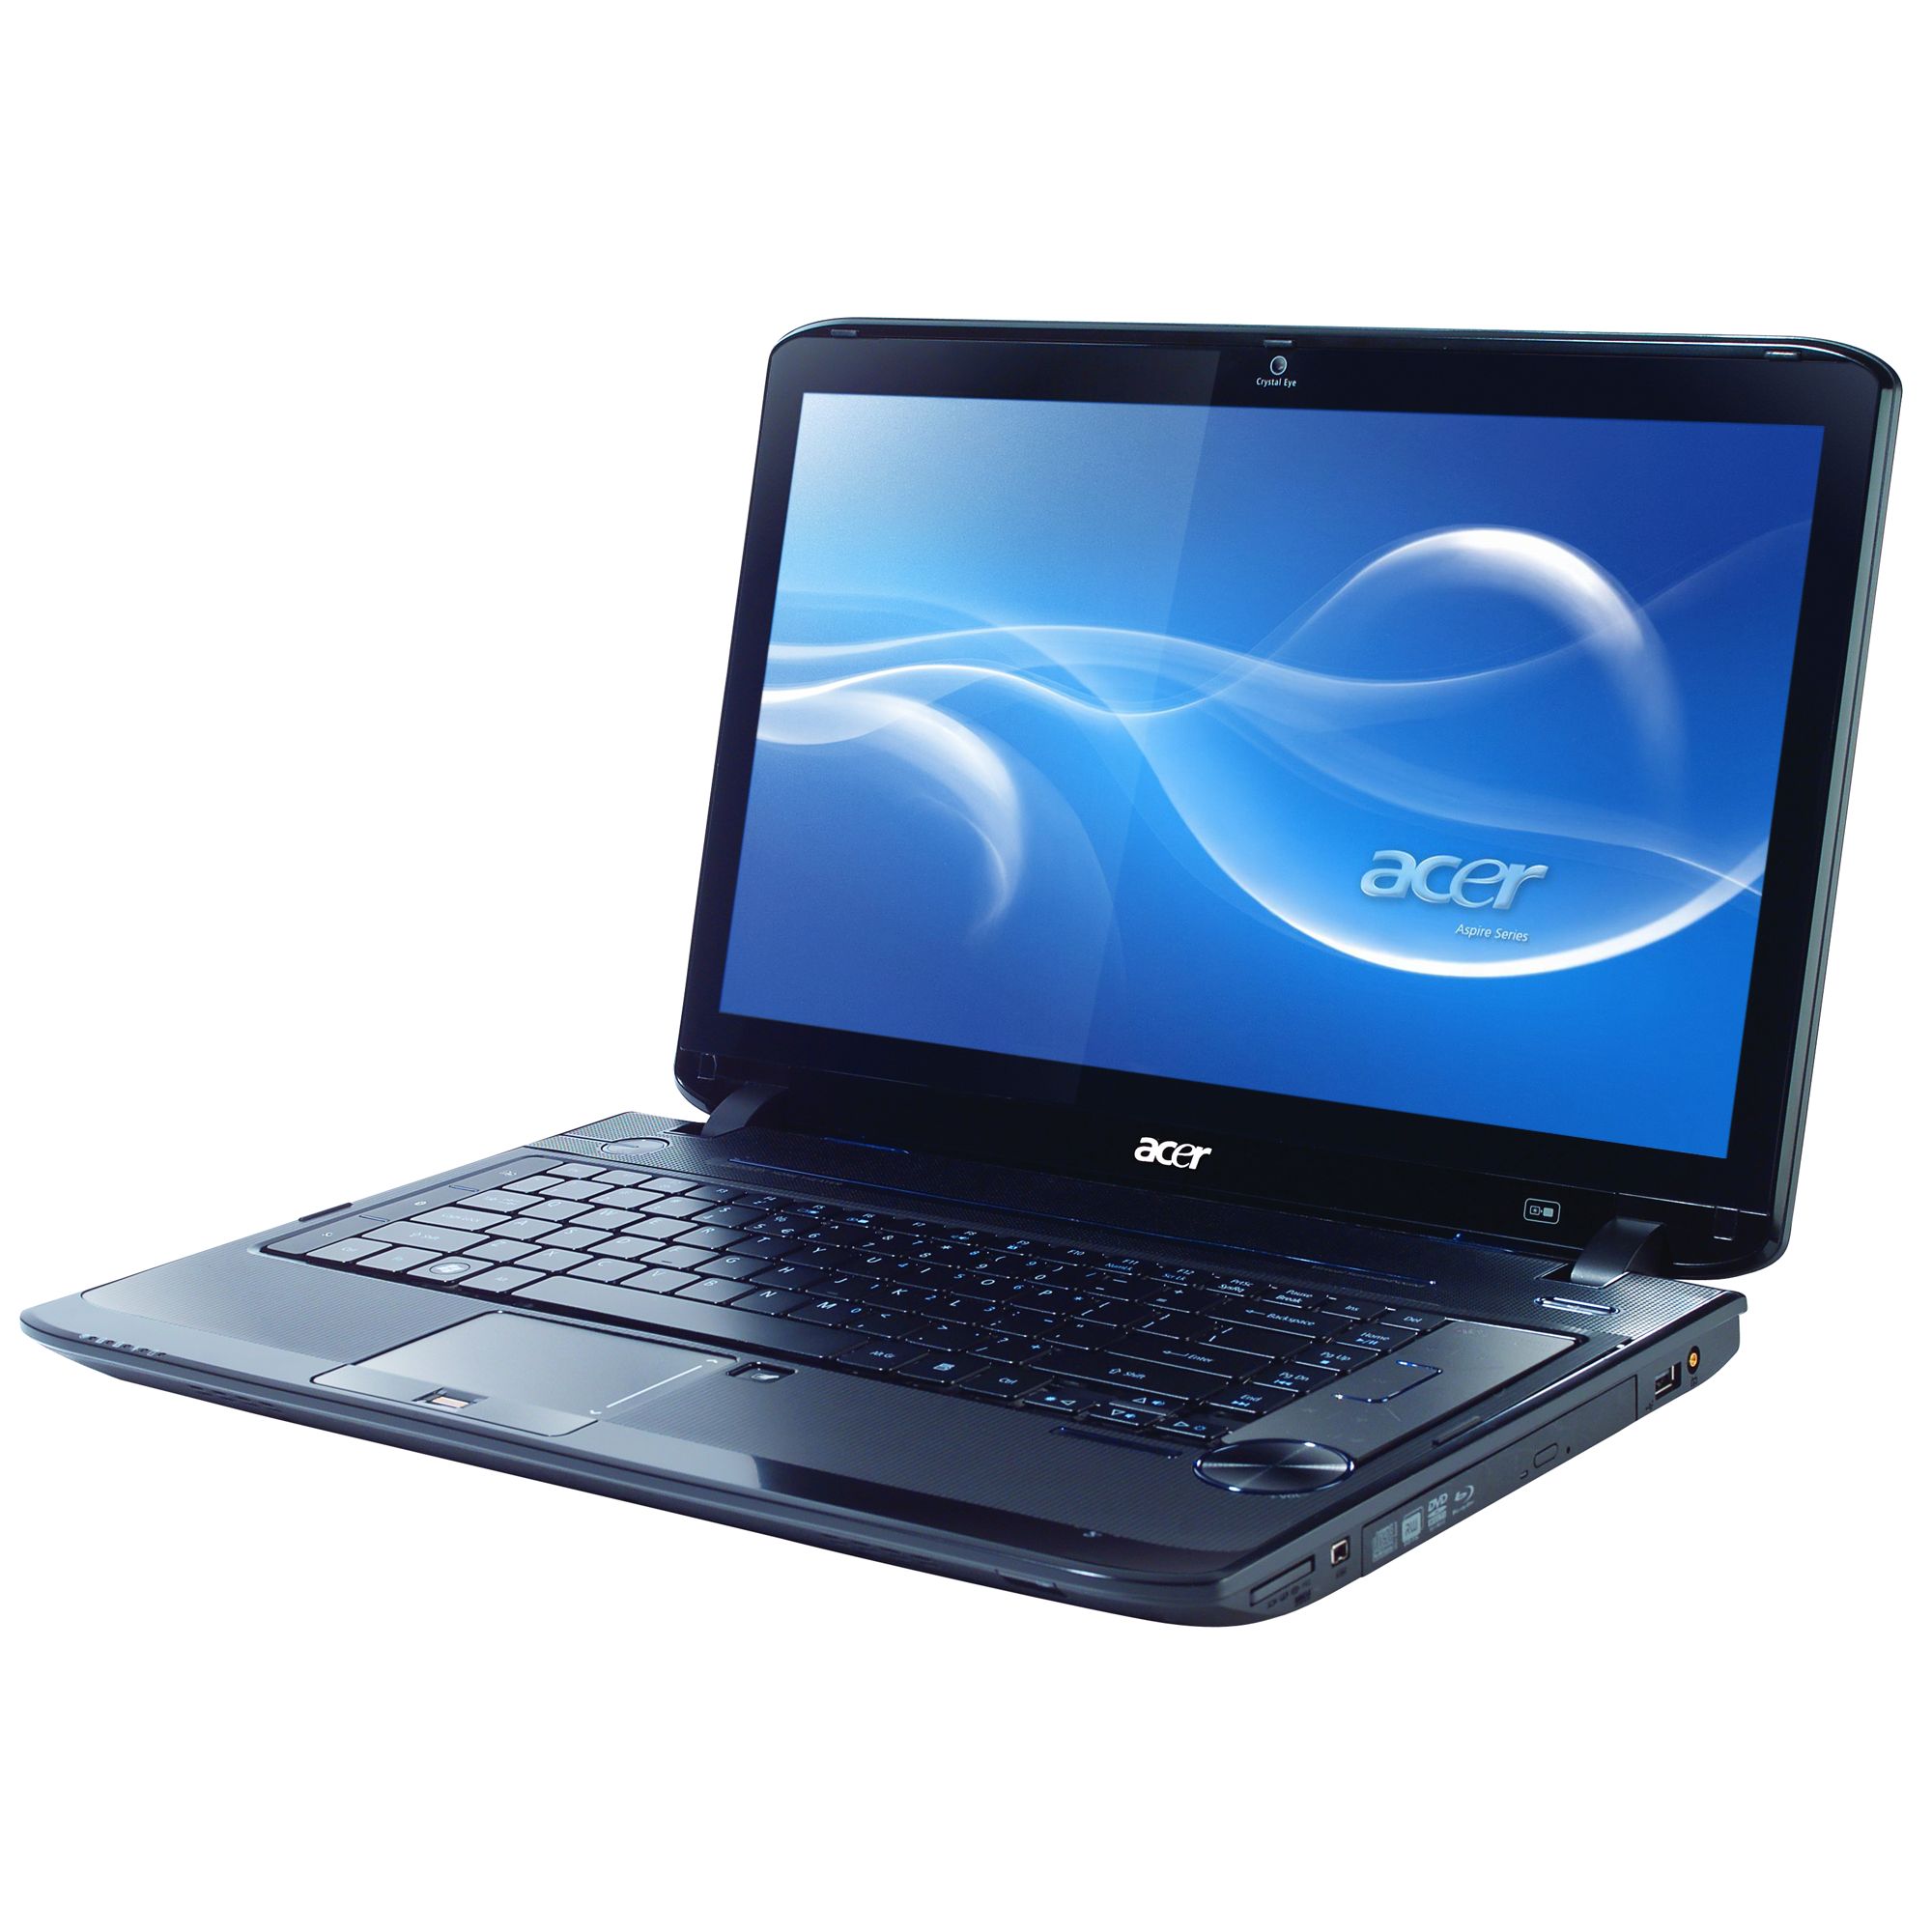 Acer Aspire 5942 Laptop, Intel Core i5, 640GB, 2.4GHz, 4GB RAM with 15.6 Inch Display at John Lewis